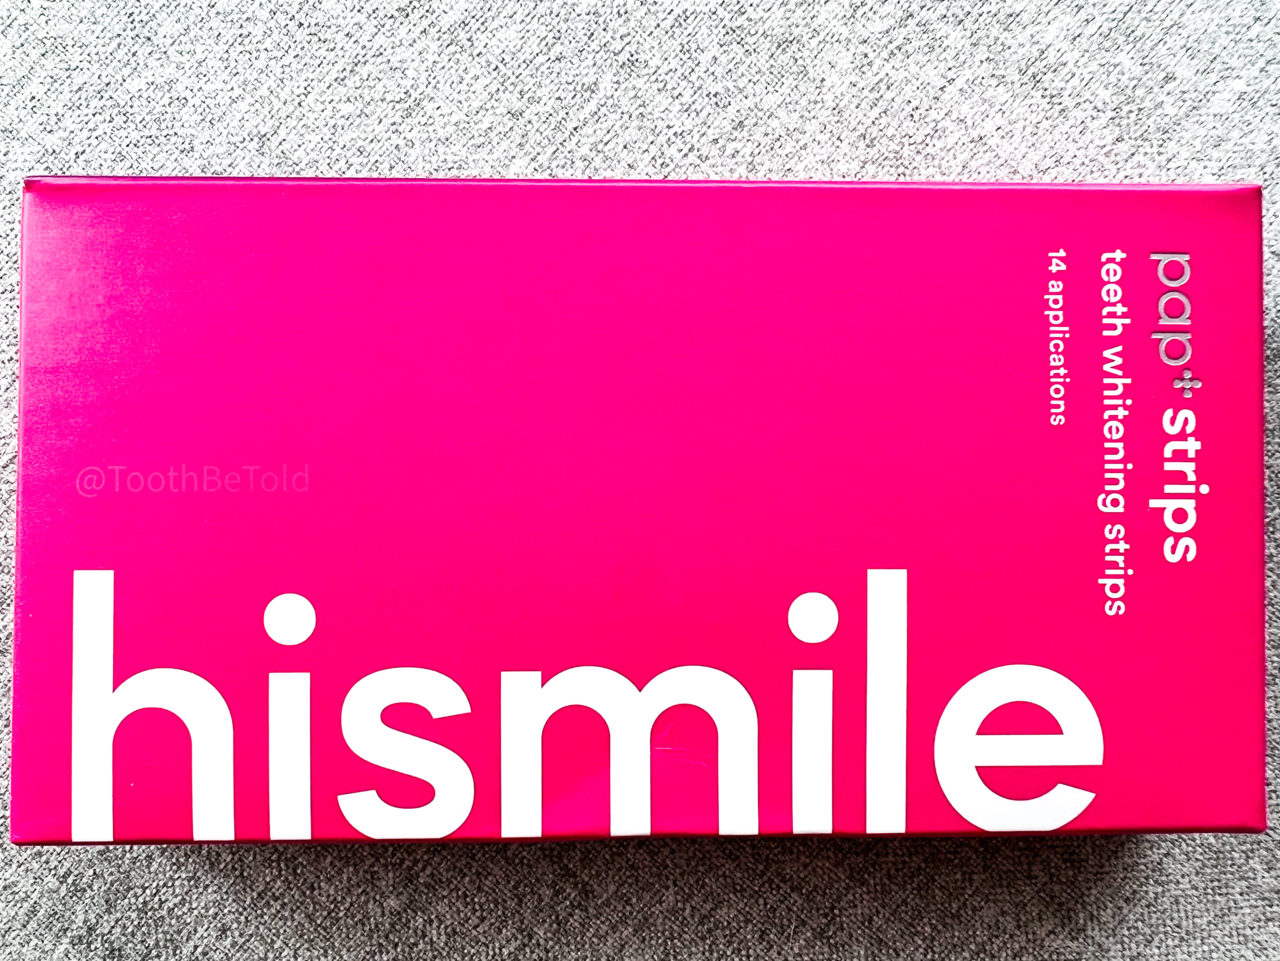 Photo of tooth whitening strips product by HiSmile